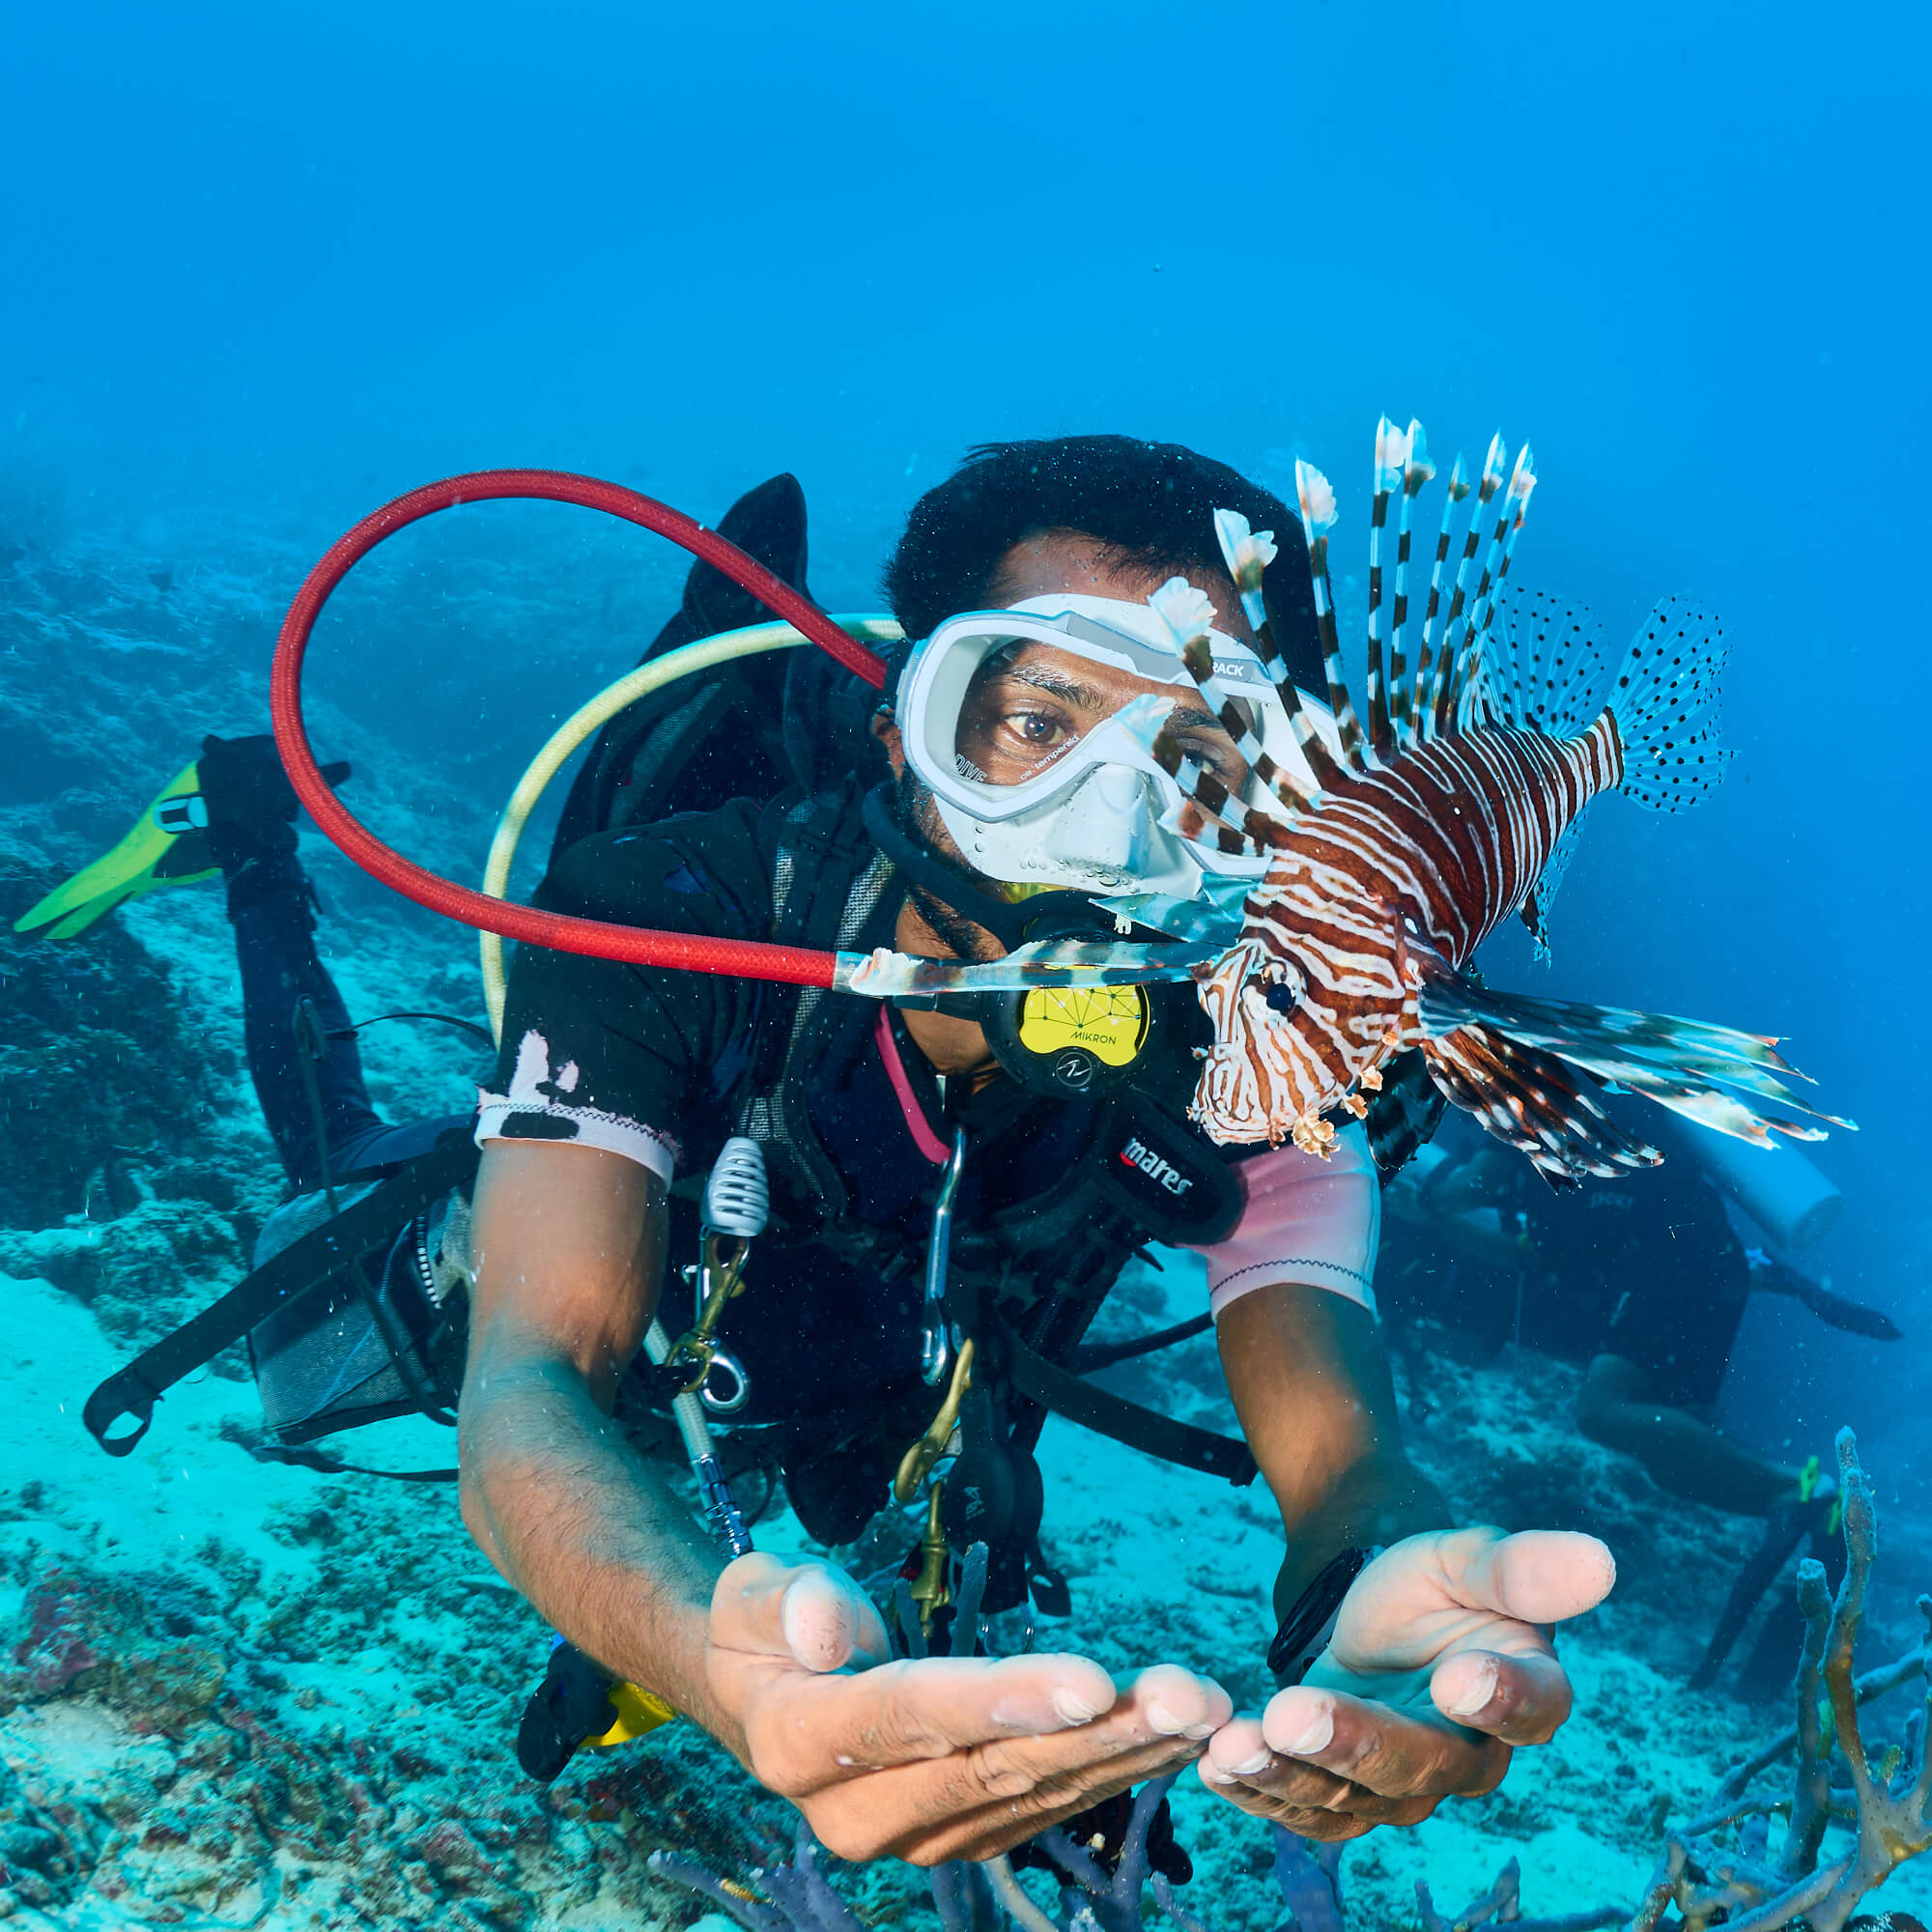 The diver and the lionfish